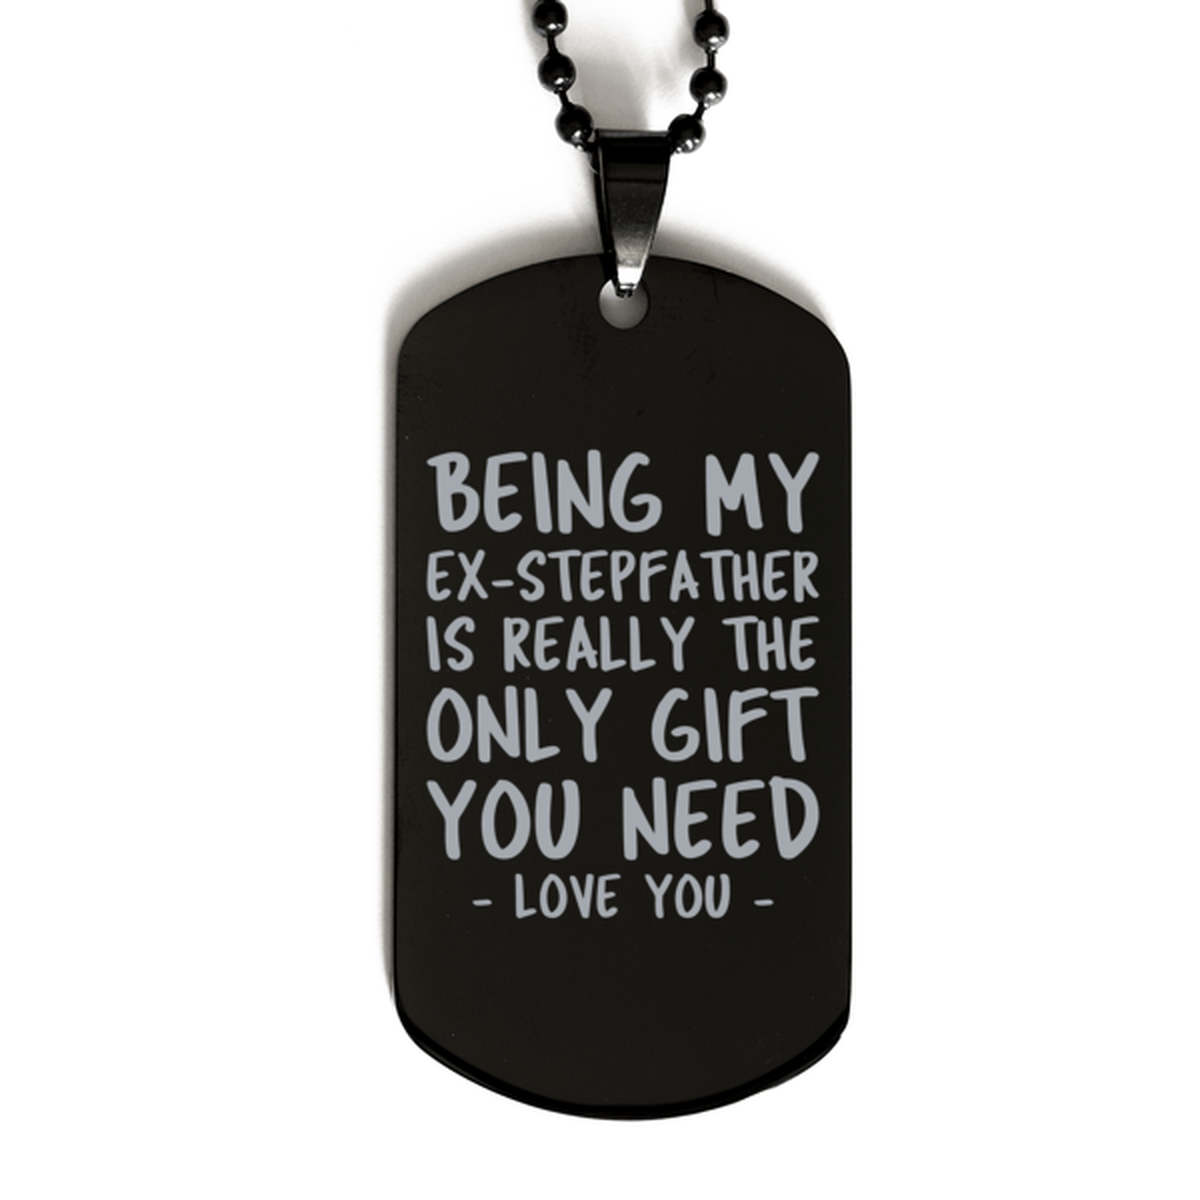 Funny Ex-stepfather Black Dog Tag Necklace, Being My Ex-stepfather Is Really the Only Gift You Need, Best Birthday Gifts for Ex-stepfather